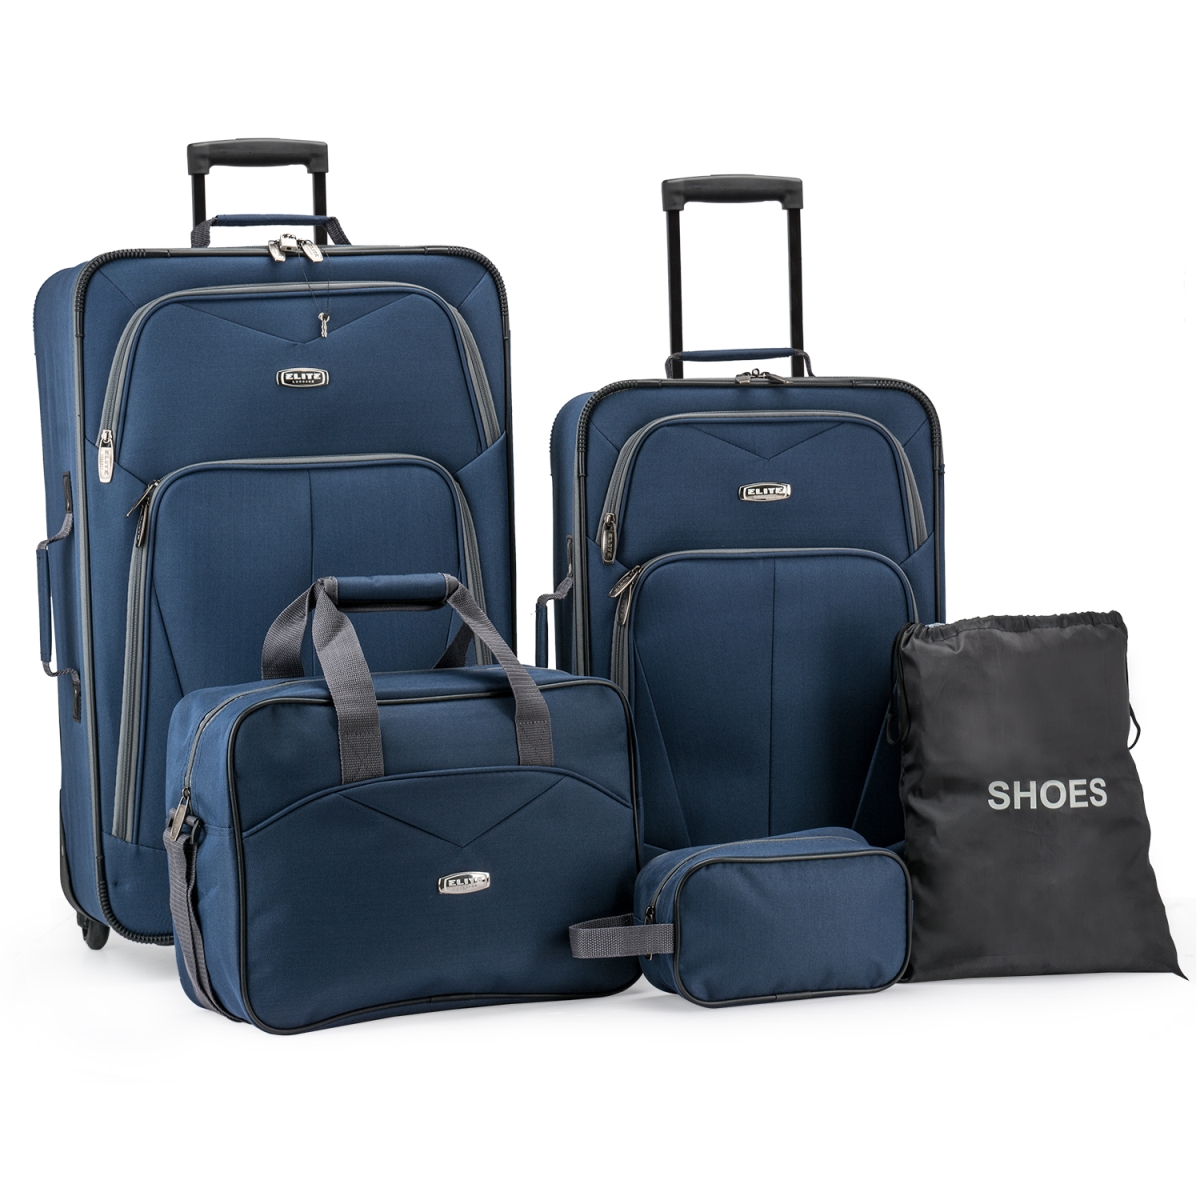 El08094n Whitfield 5 Piece Softside Lightweight Rolling Luggage Set, Navy